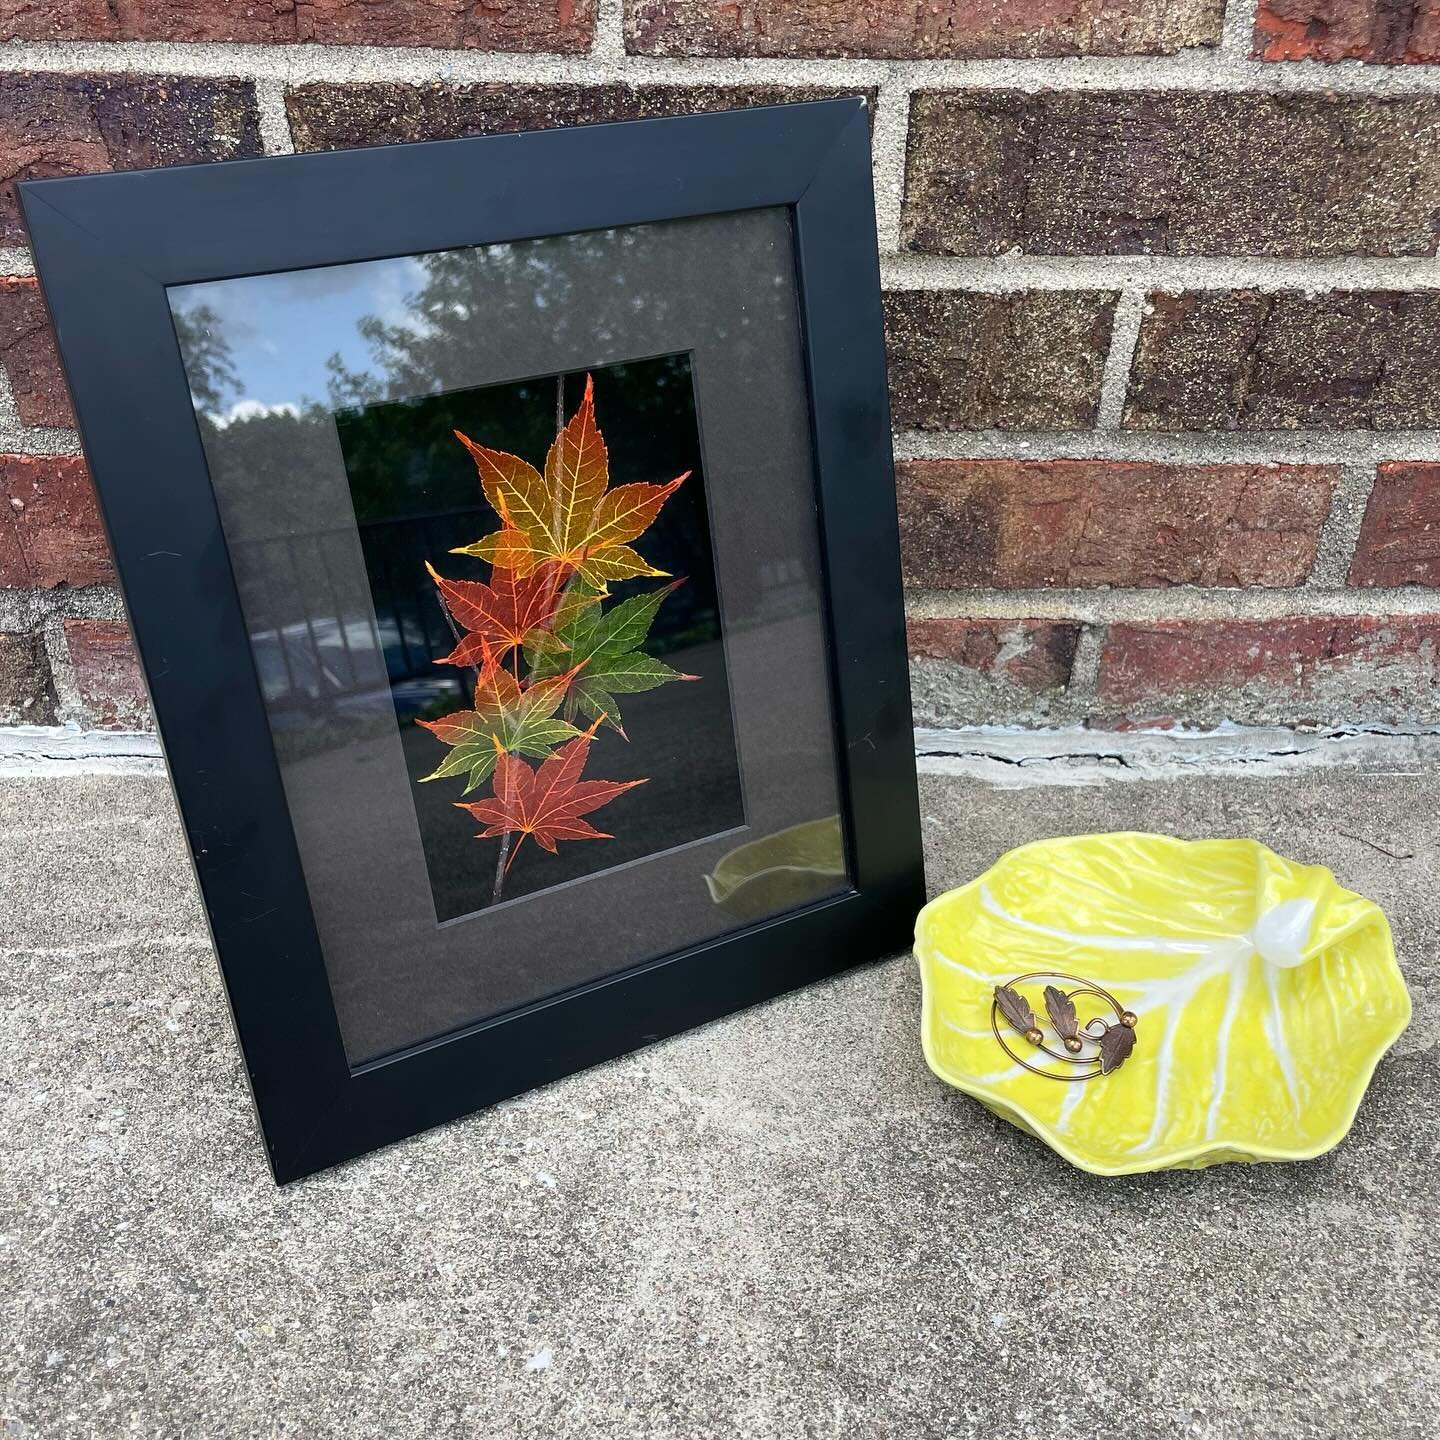 Throwing out a ~leafy~ moment today! &ldquo;Leaf Lines&rdquo; by Booker Morey, 10x12, $100. Catchall dish, 7&rdquo;x6.5, $24. Copper leaf brooch, 2&rdquo; wide, $18.